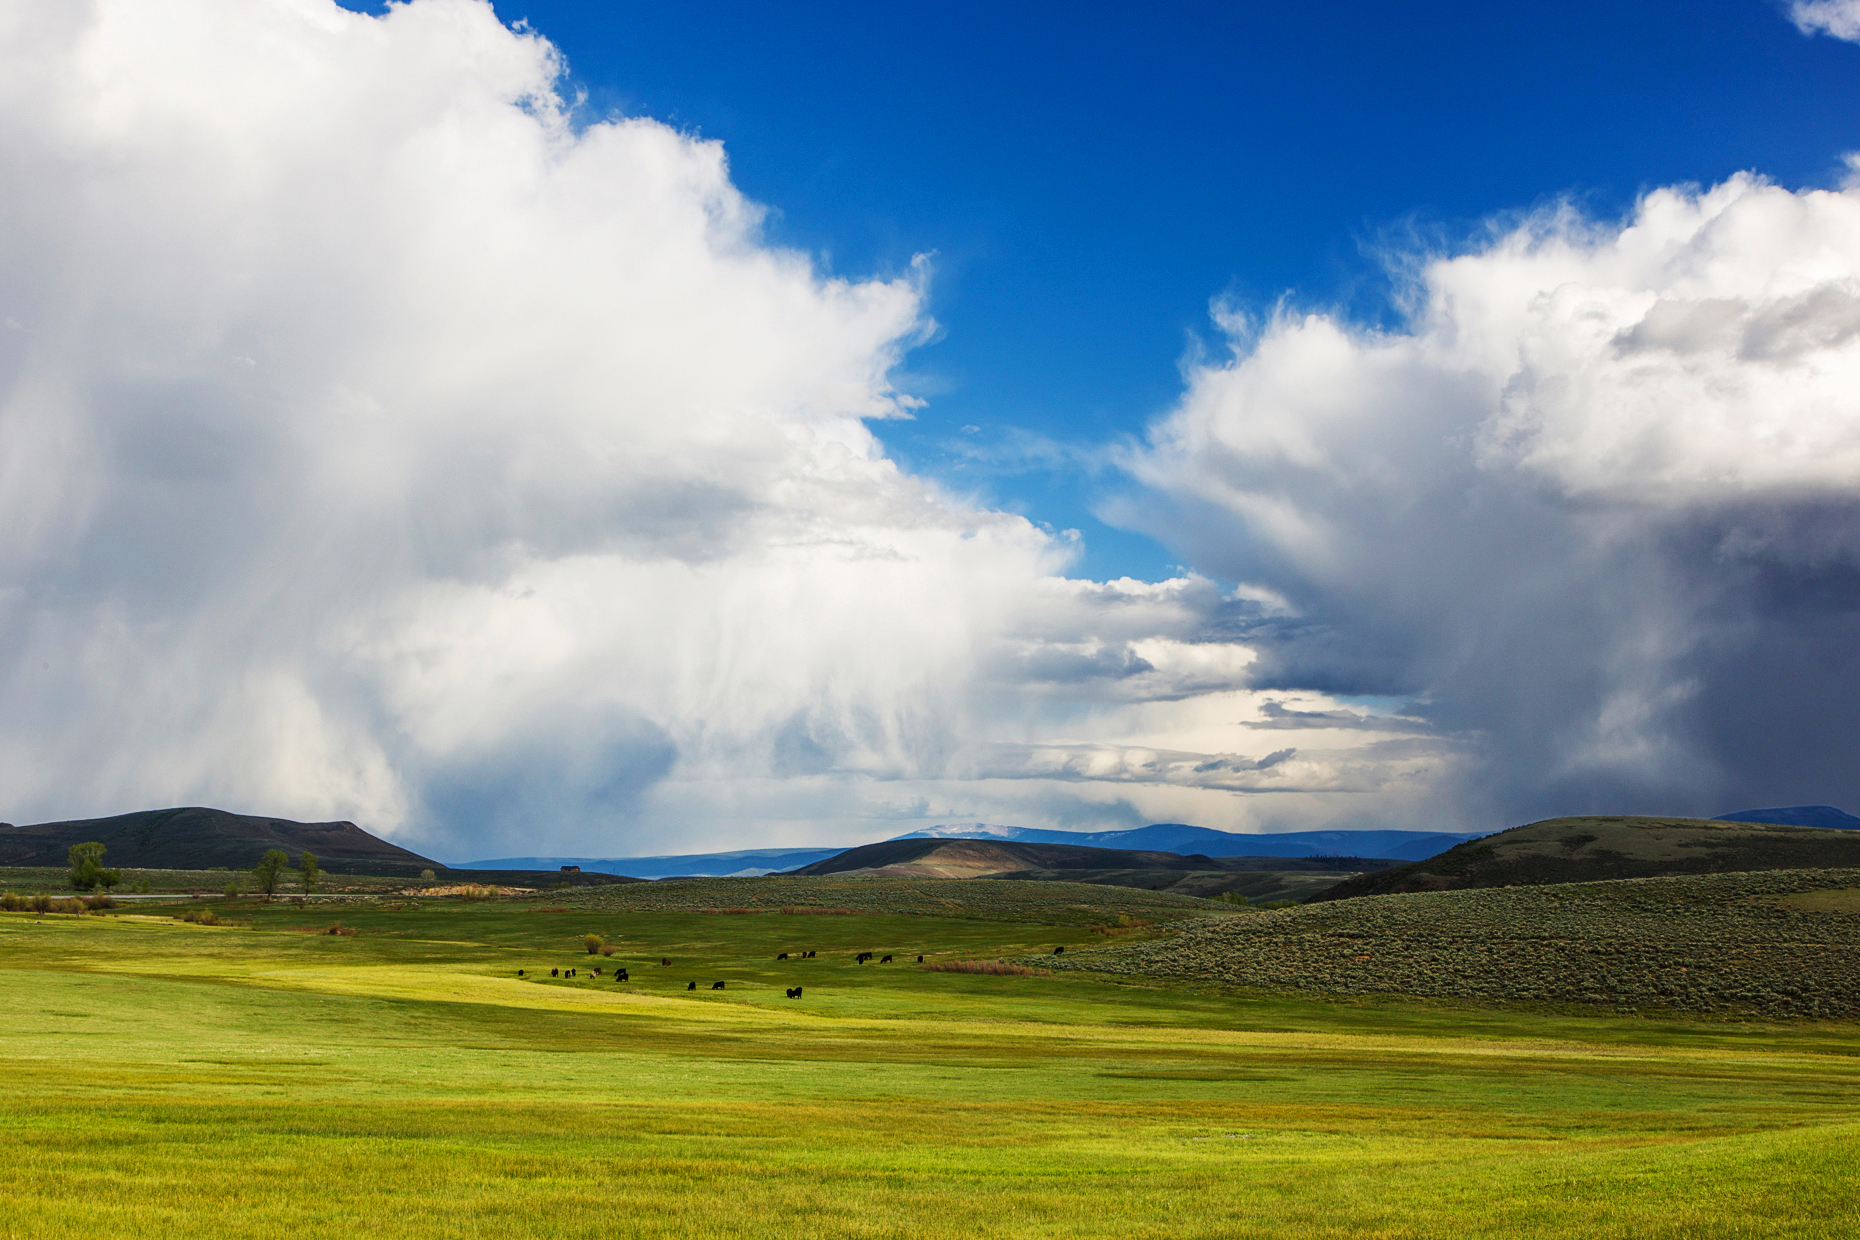 Springtime view southeast of ranchland towards the Sawatch Range of mountains and clearing stormy skies, taken from between Gunnison and Parlin, Colorado, USA